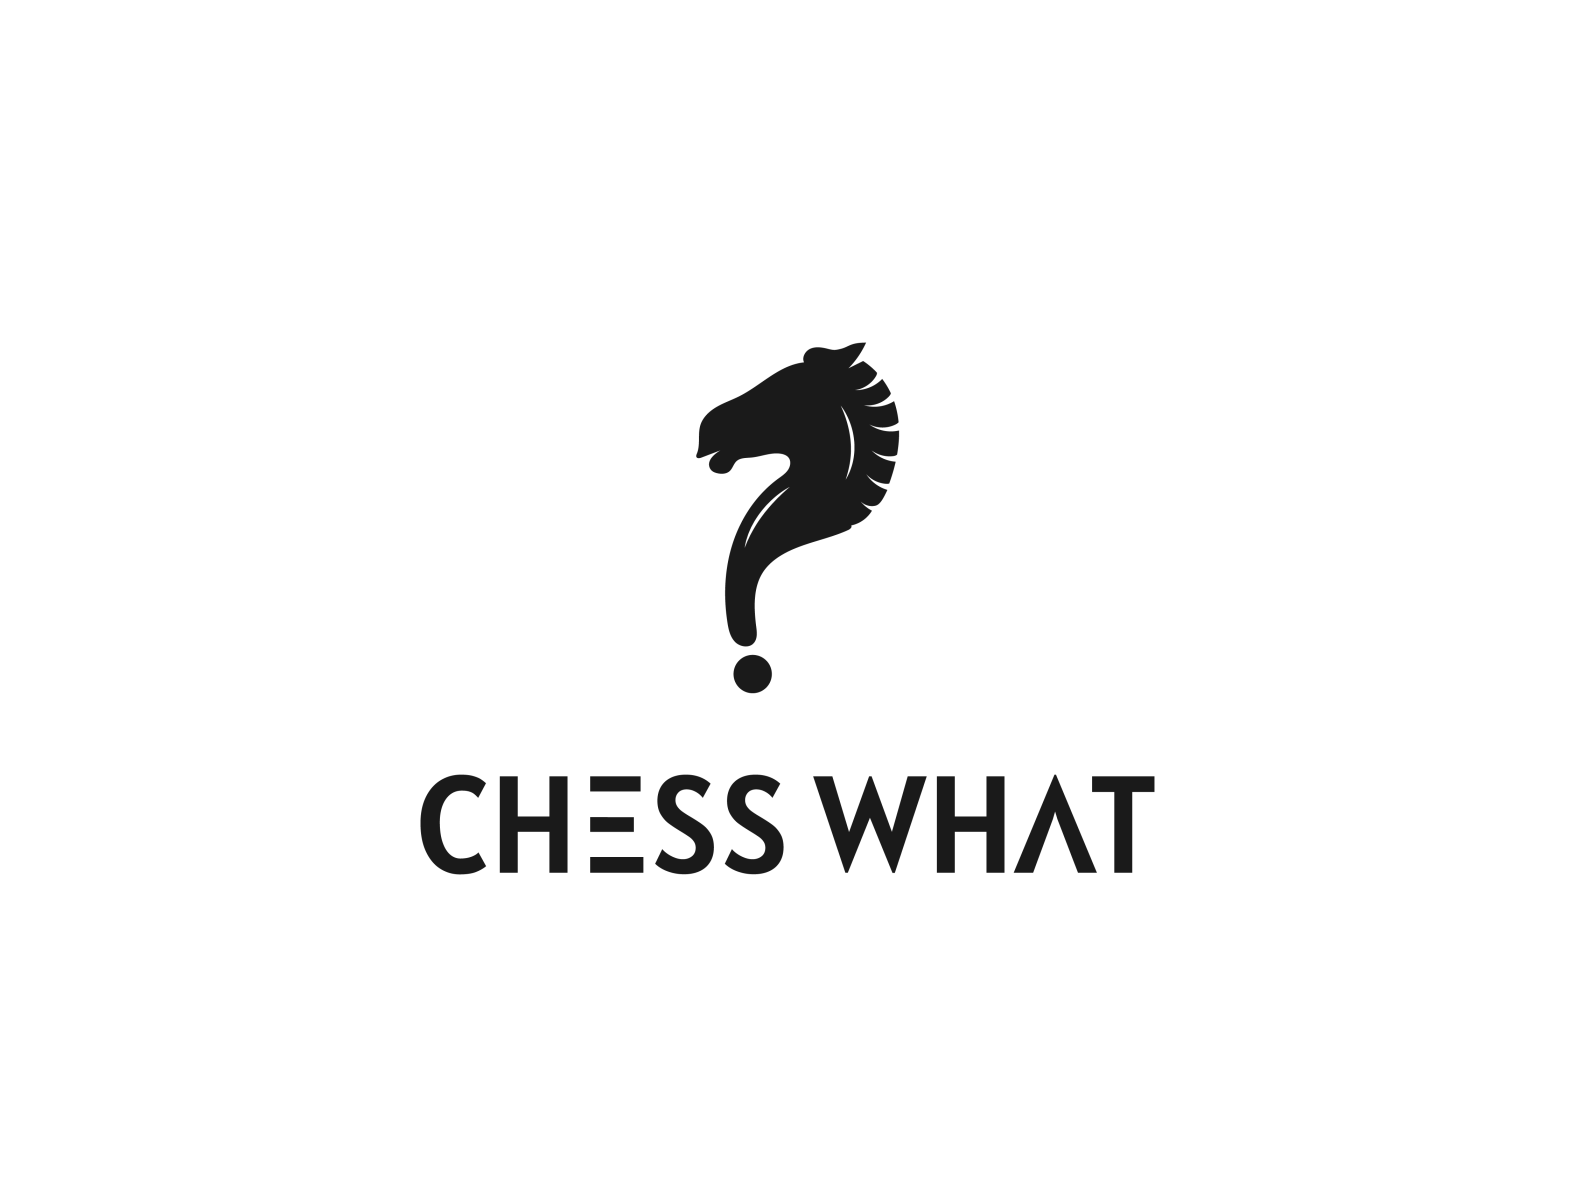 Horse | Chess logo, Knight chess, Abstract drawings